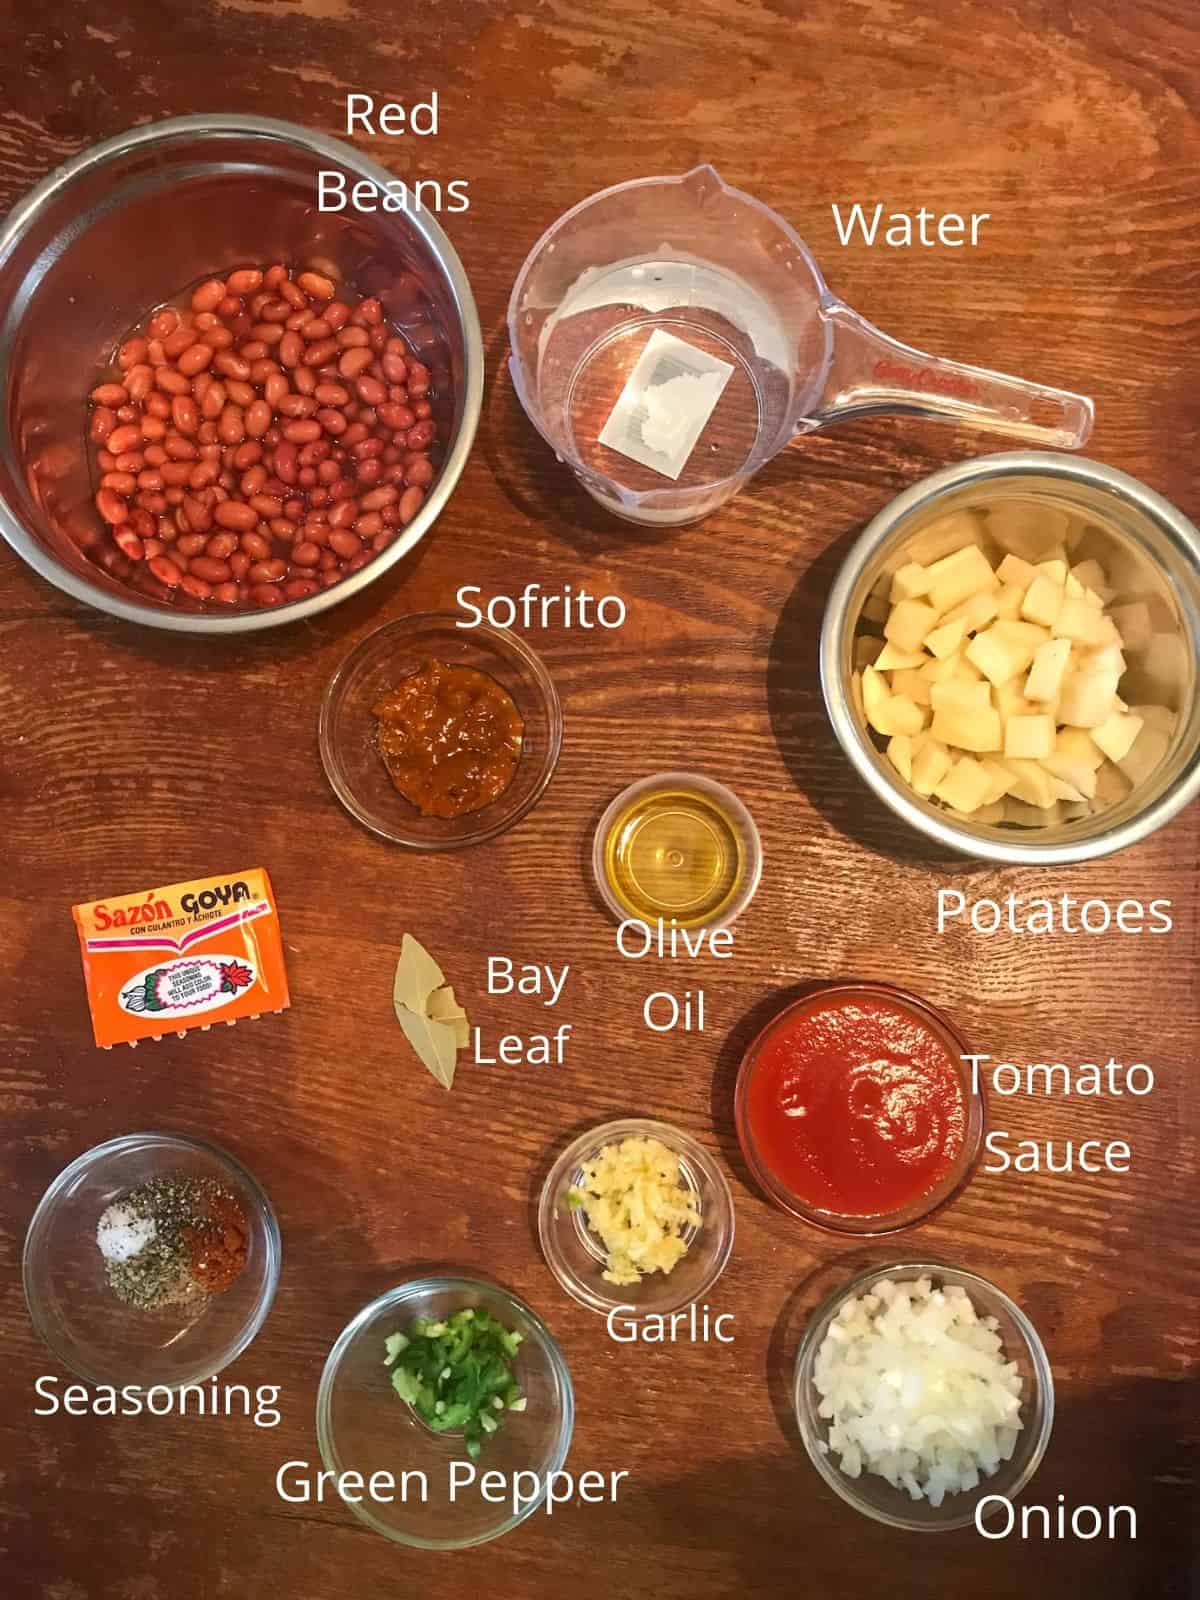 Puerto Rican Style Red Beans Ingredients